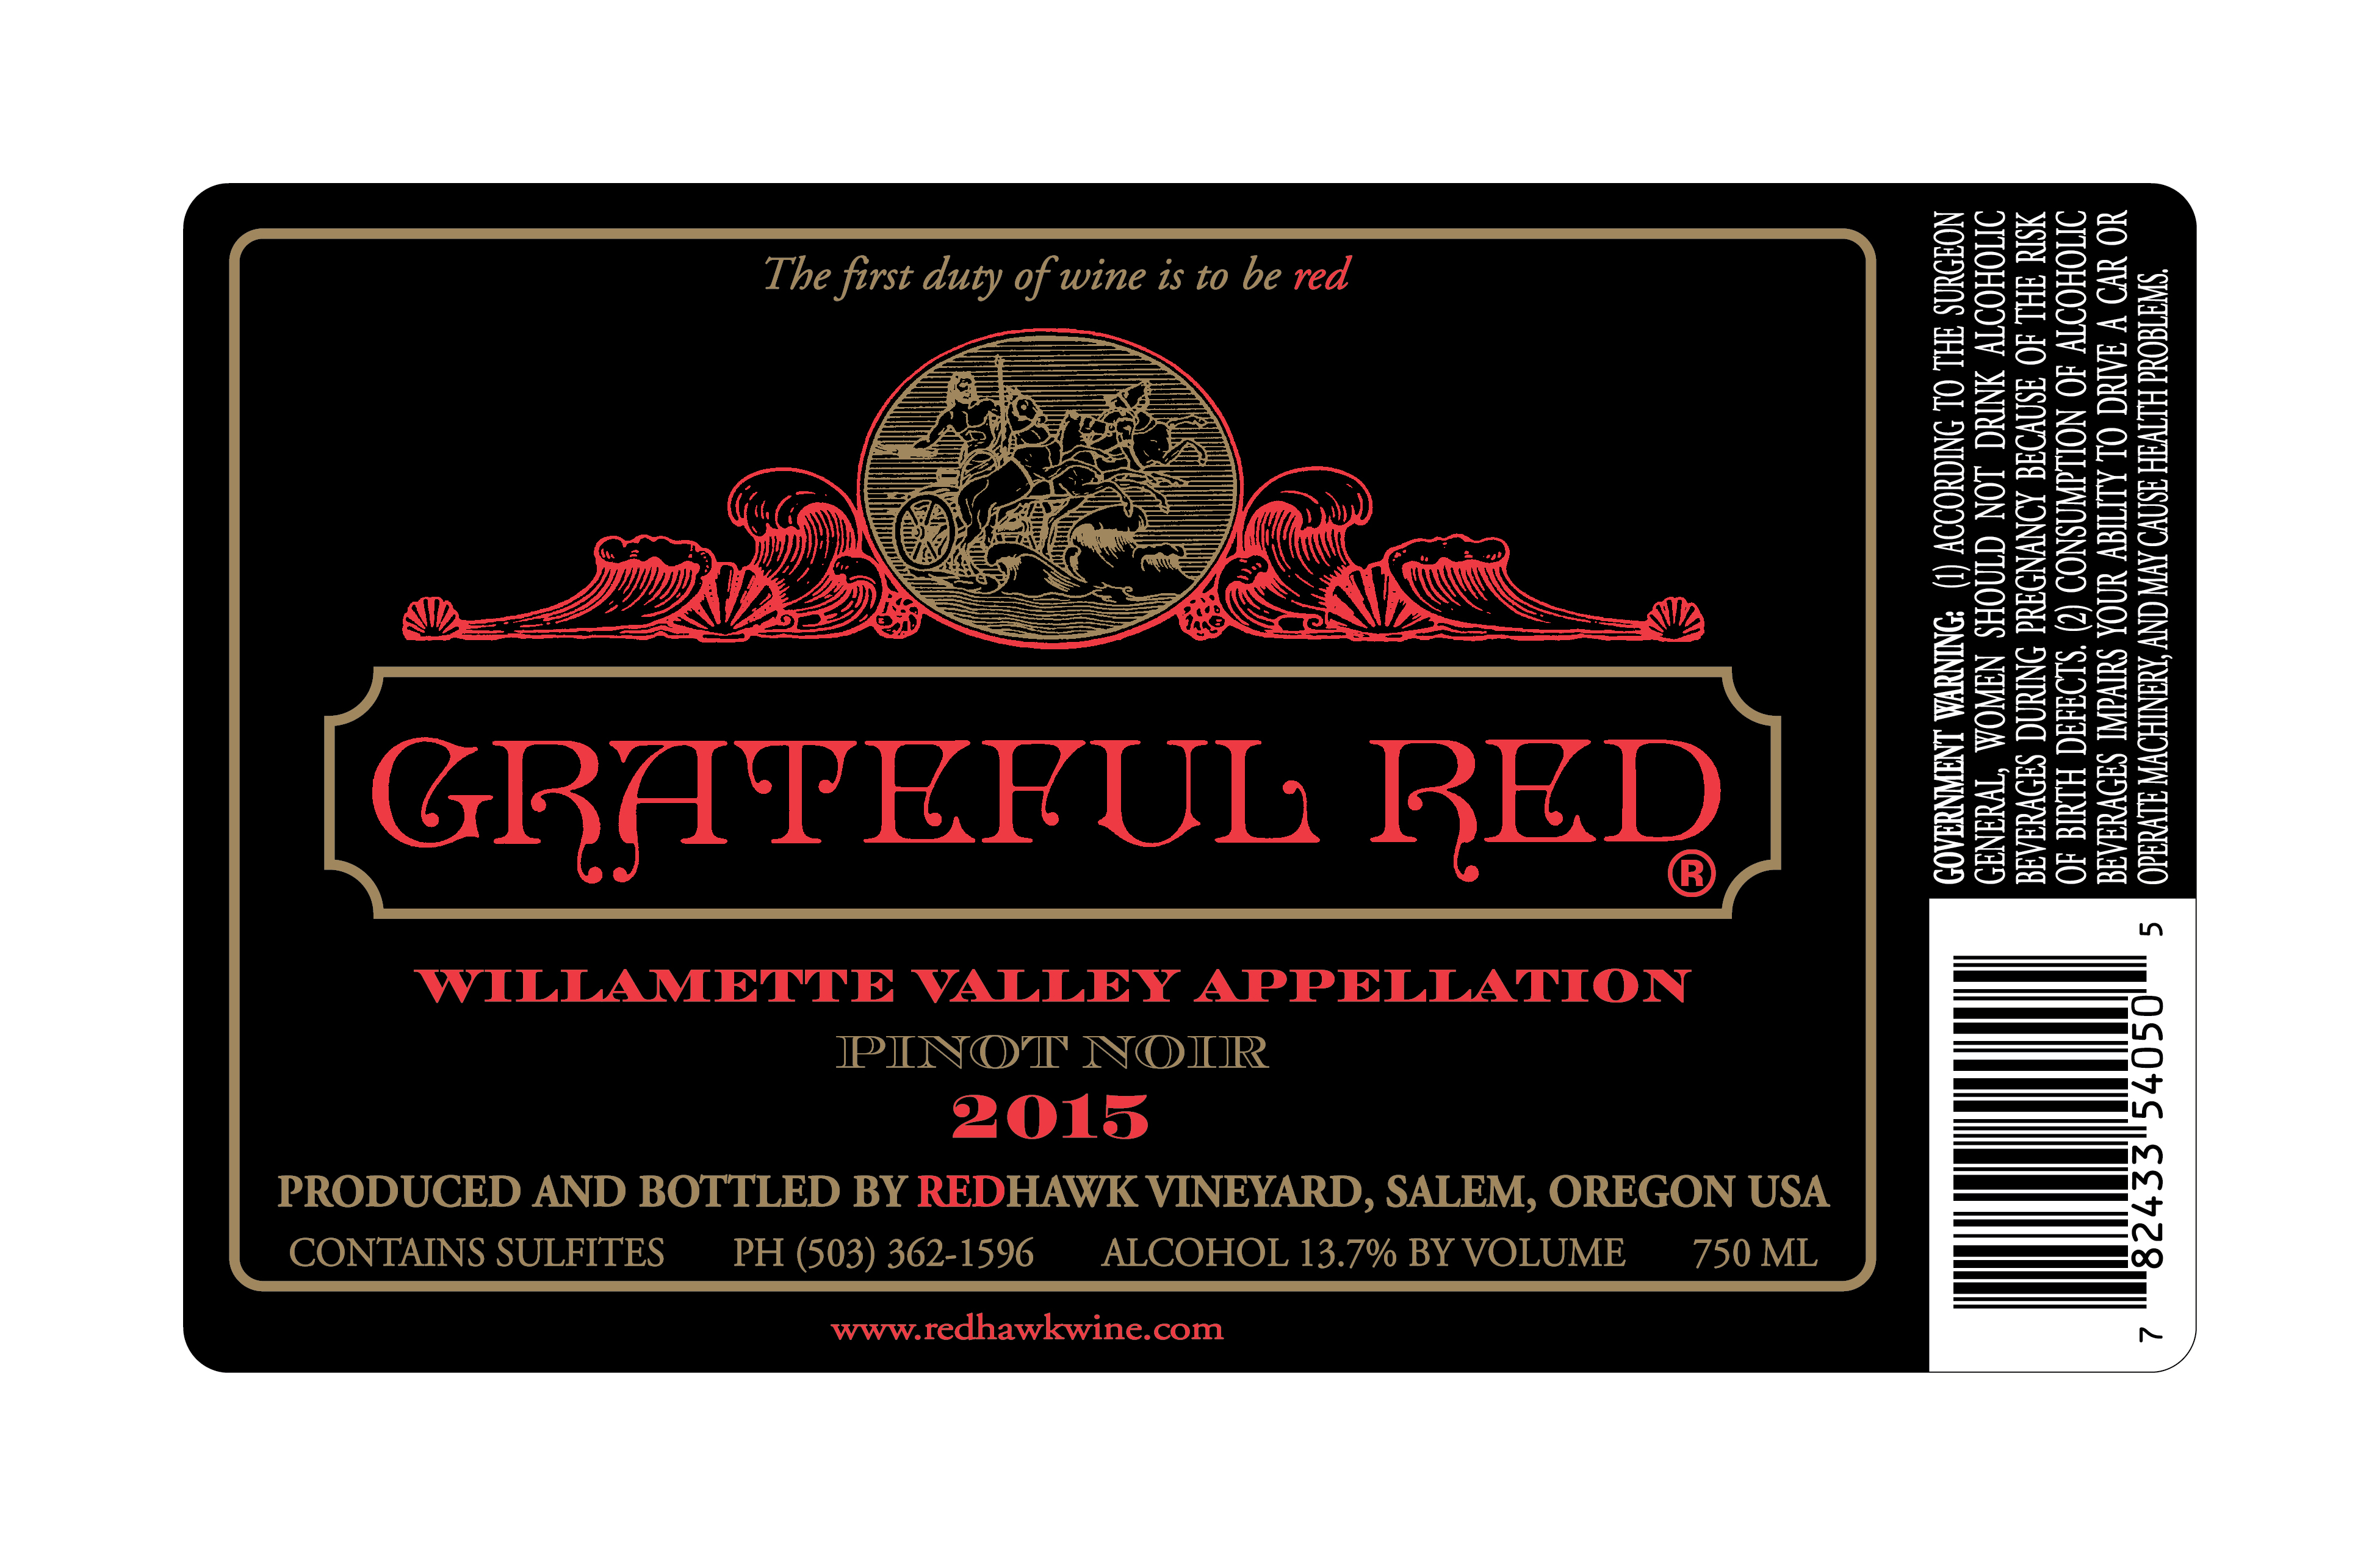 Product Image for 2021 Grateful Red Pinot Noir